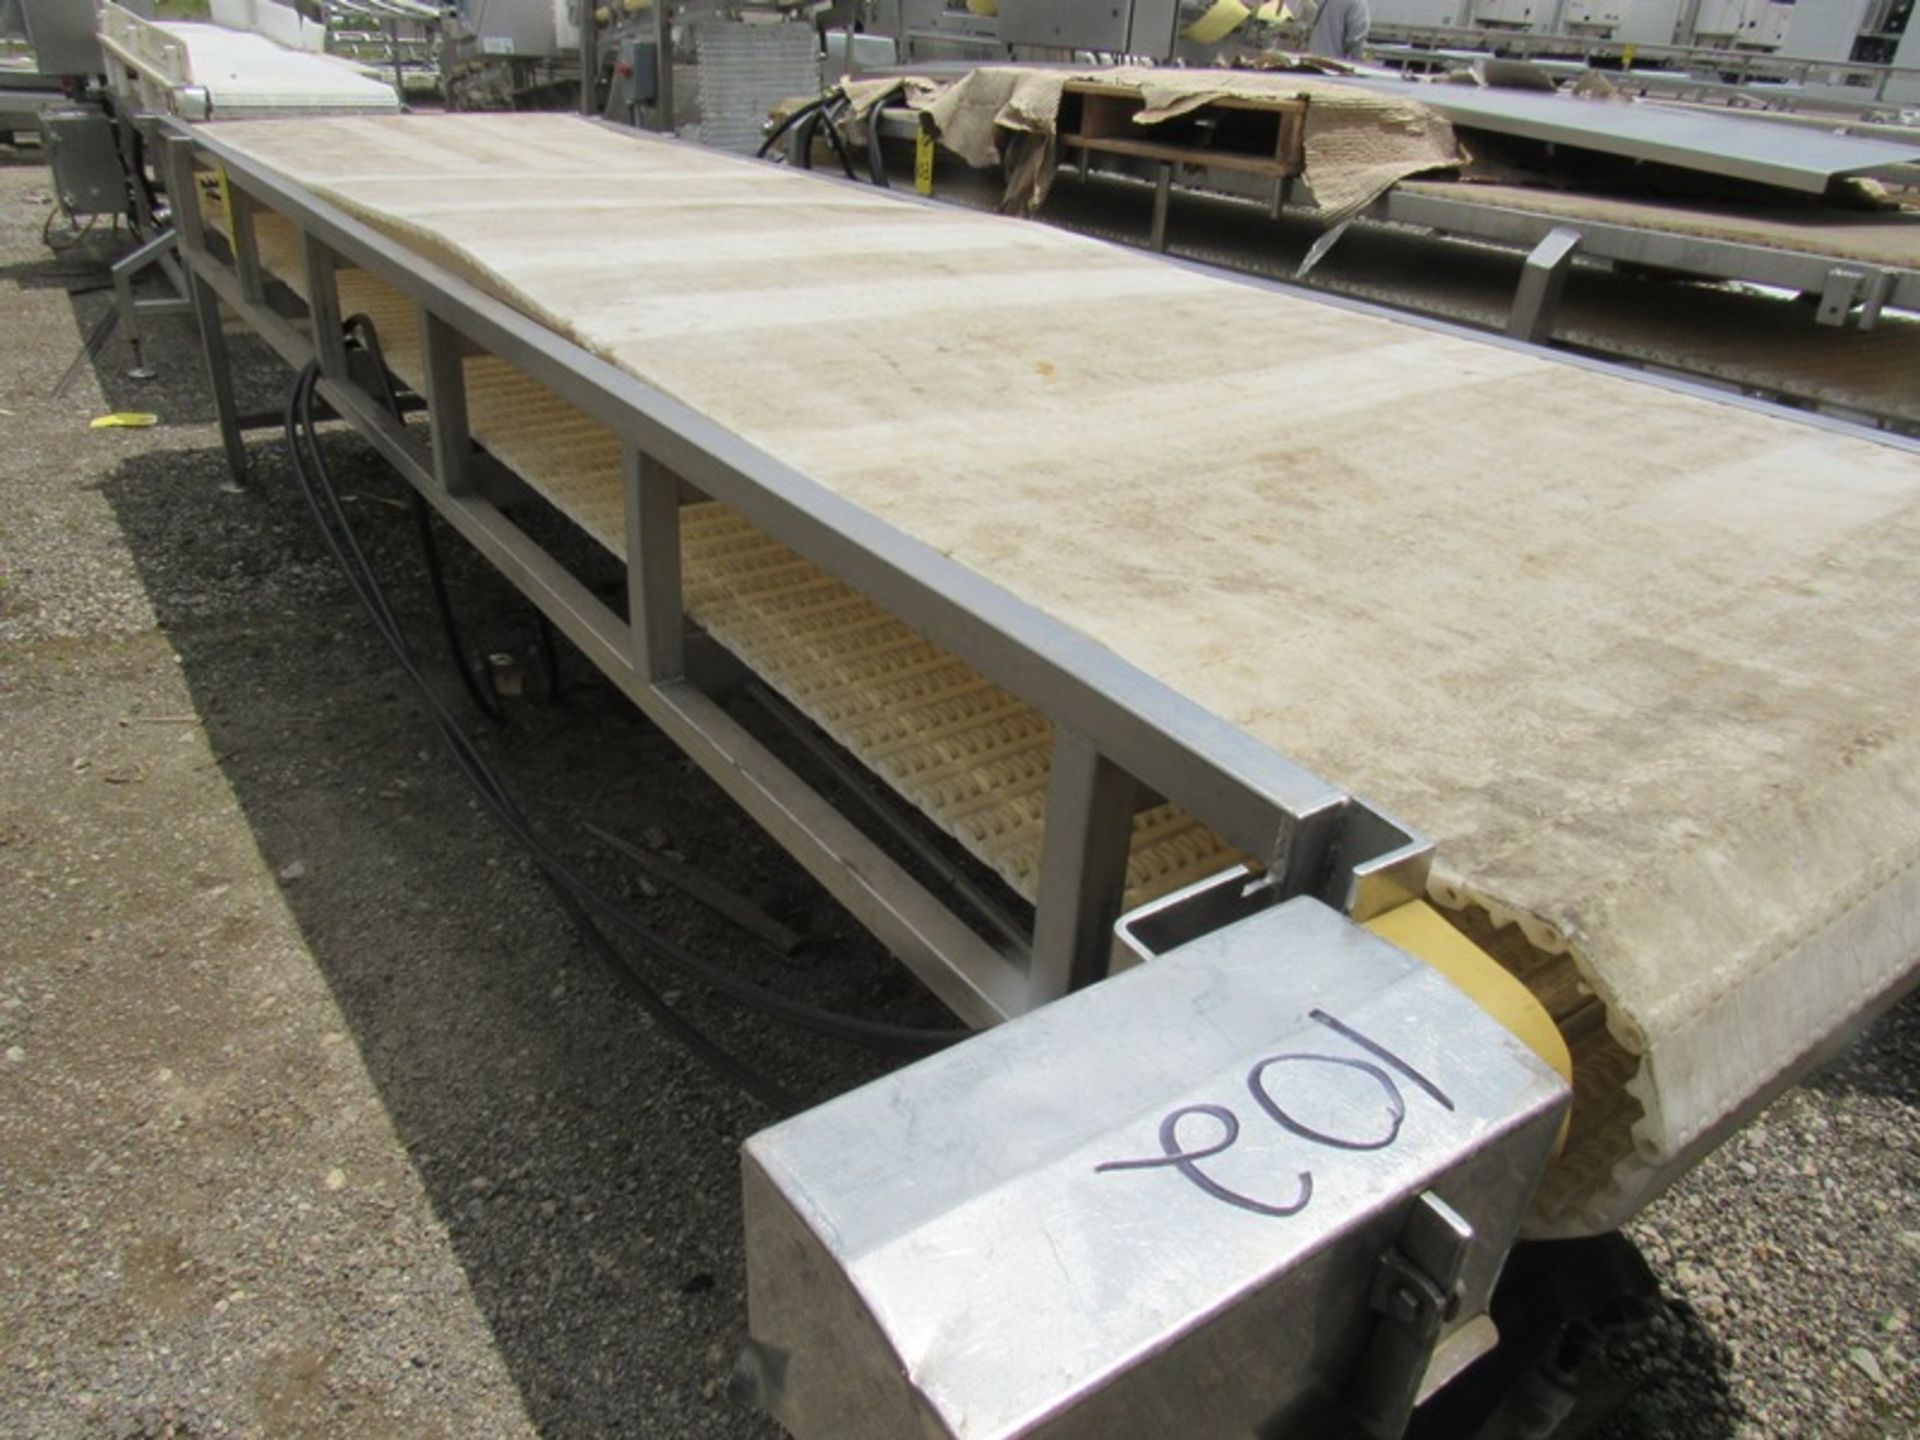 Stainless Steel Conveyor, 36" Wide X 13' Long, hydraulic drive (Loading Fee: $150.00 - Rigger: - Image 3 of 3